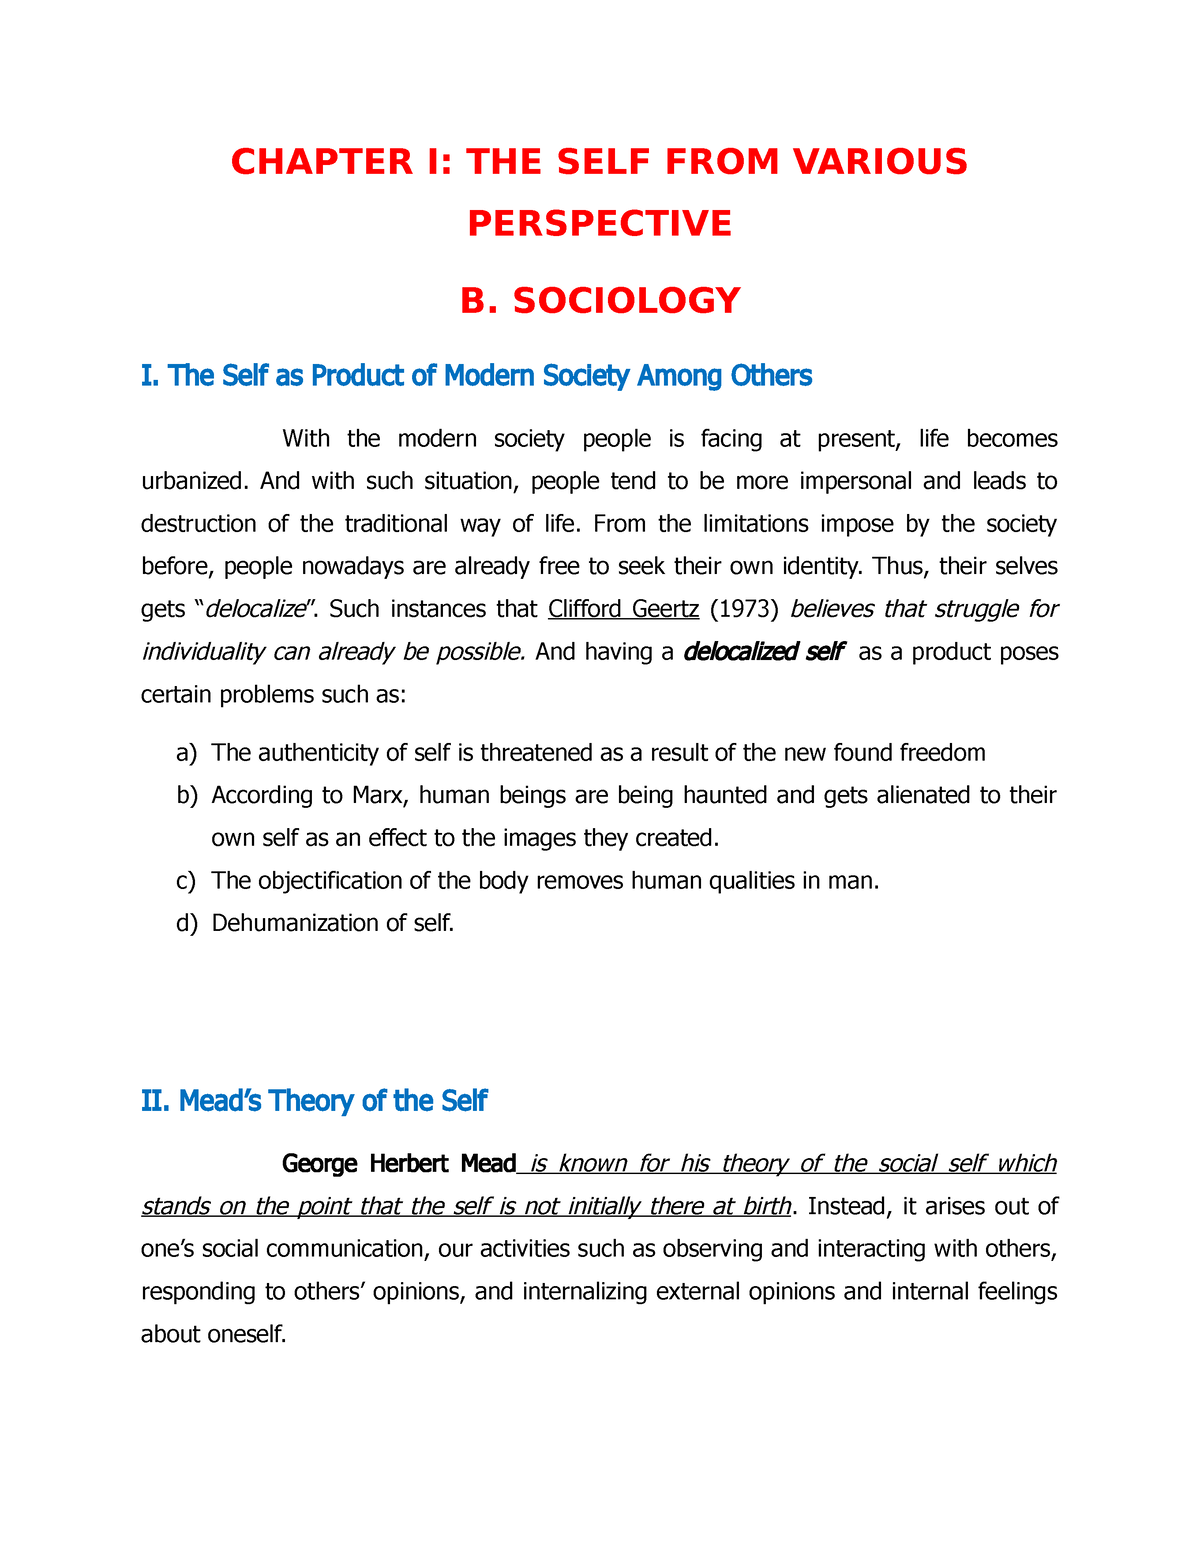 the self from various perspectives essay